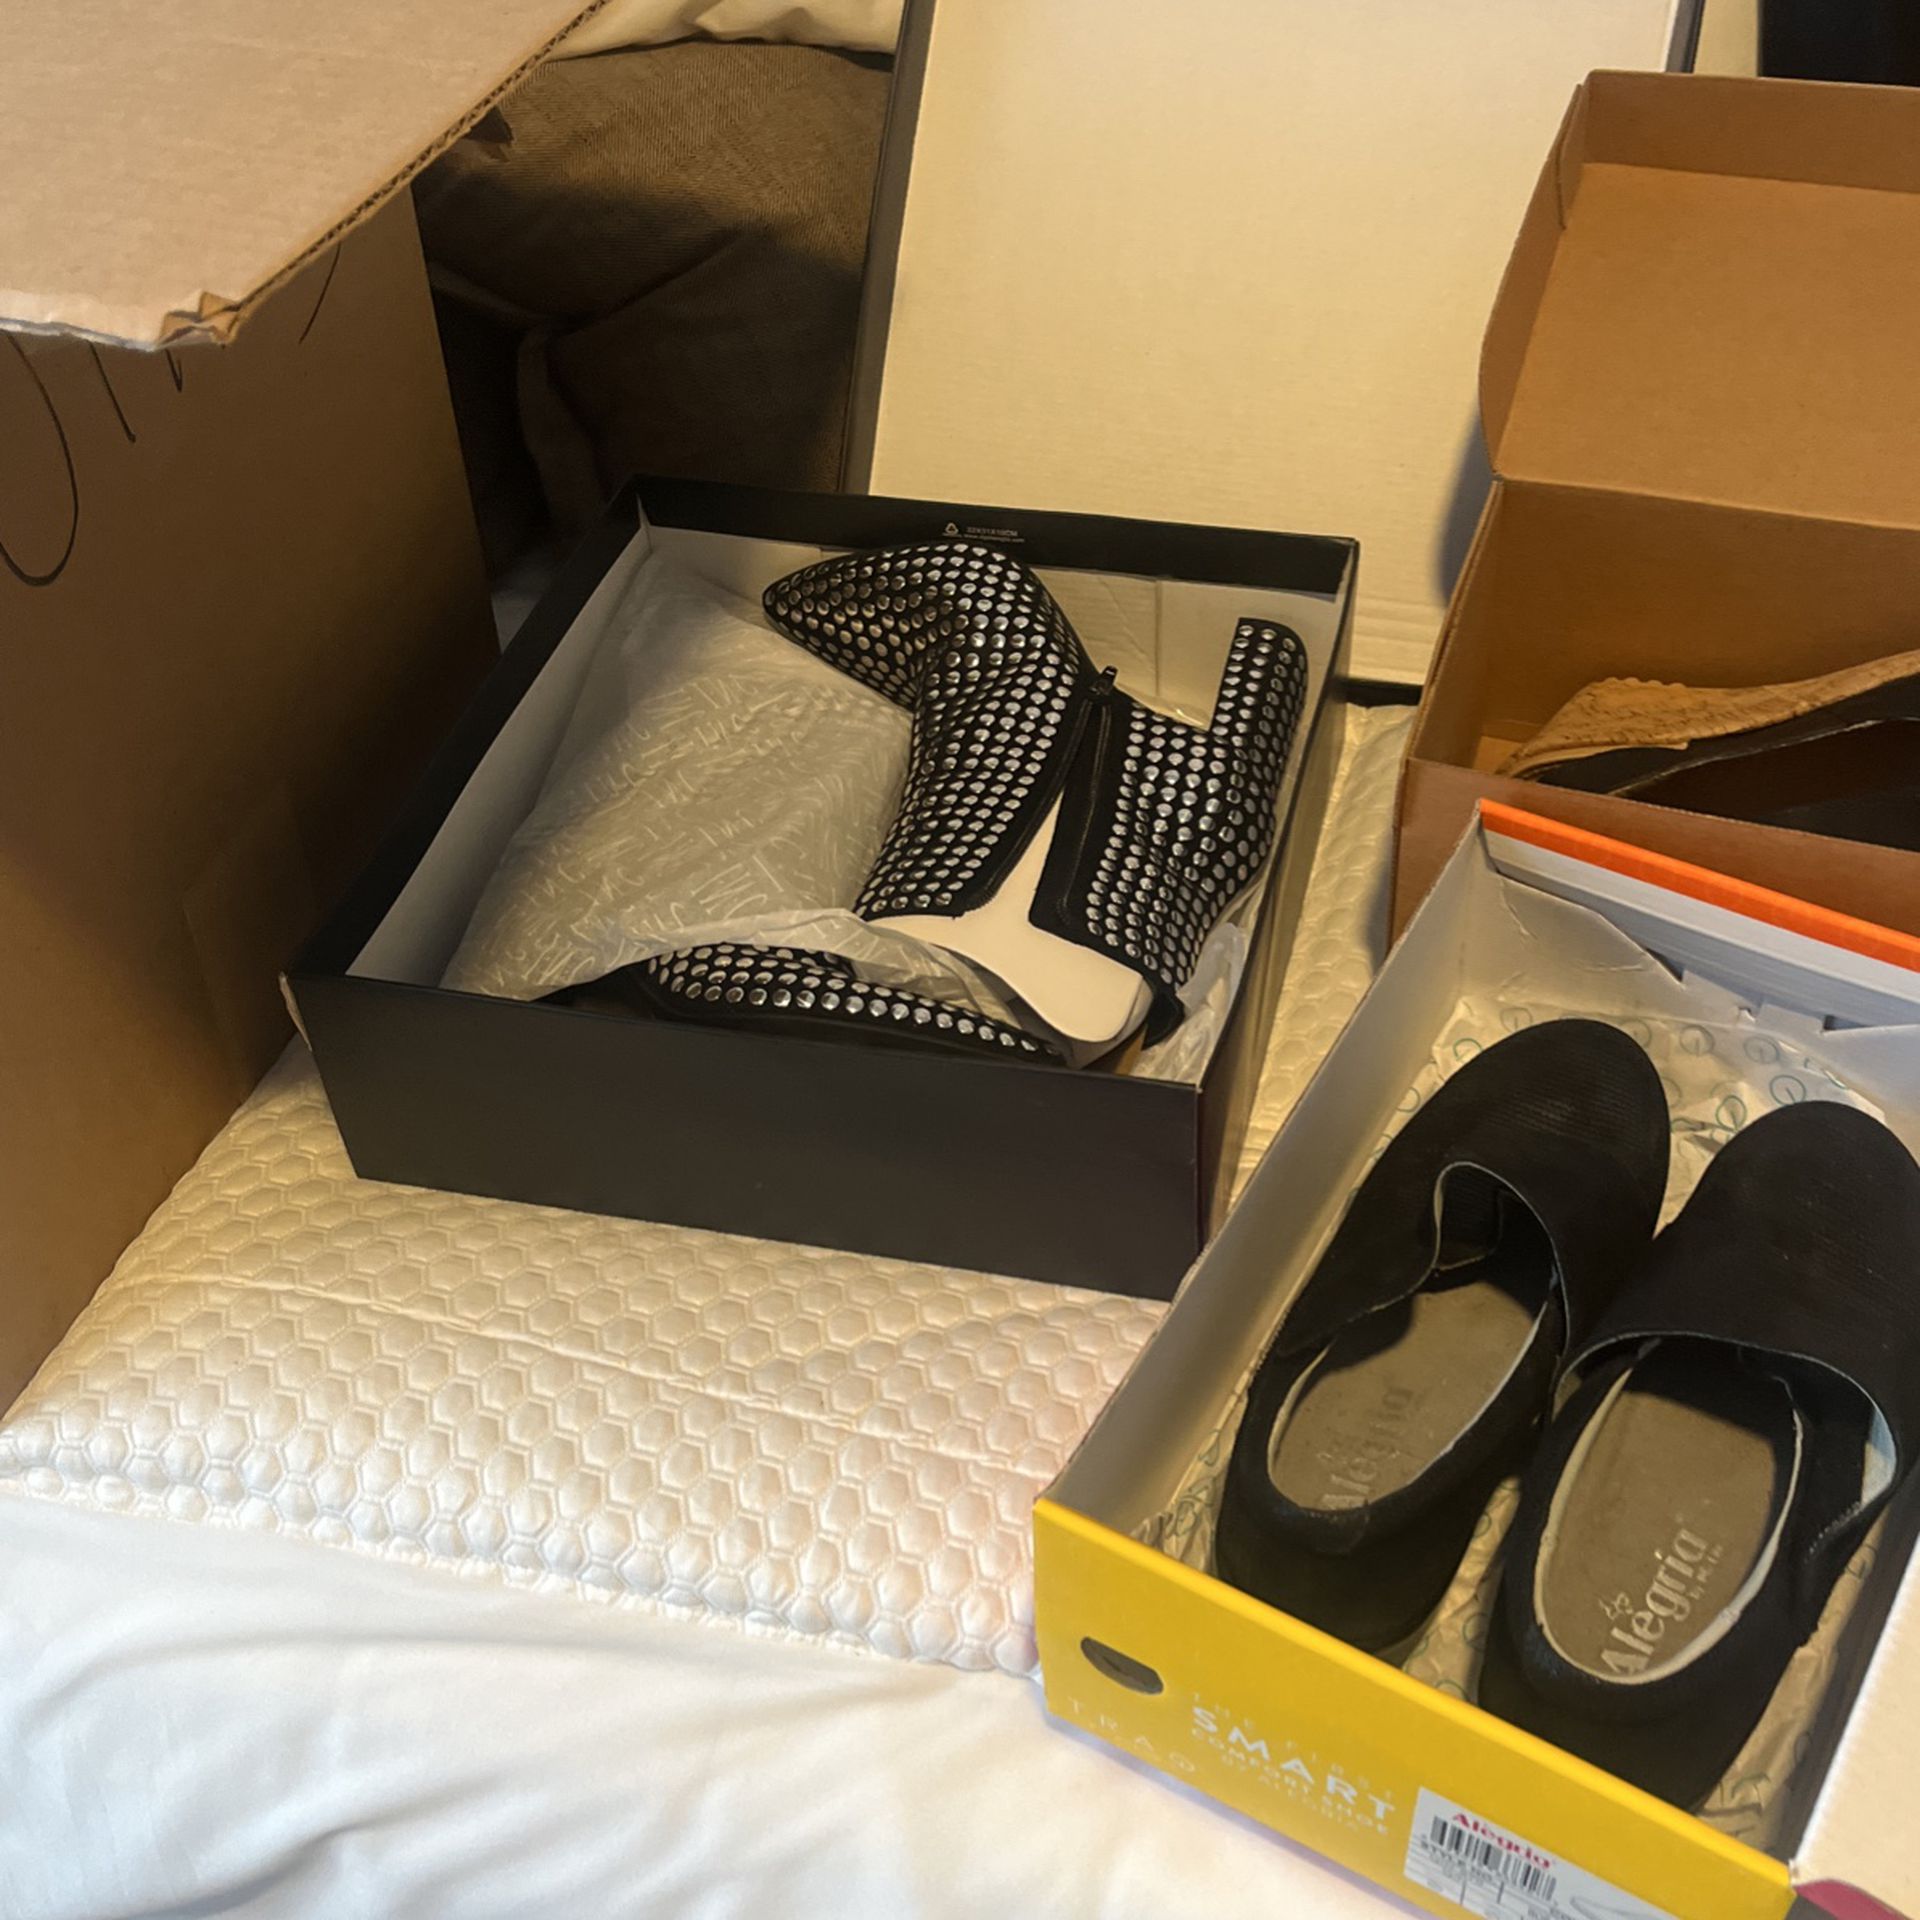 Designer Shoes- New In boxes! Estate Sale today only 5/21